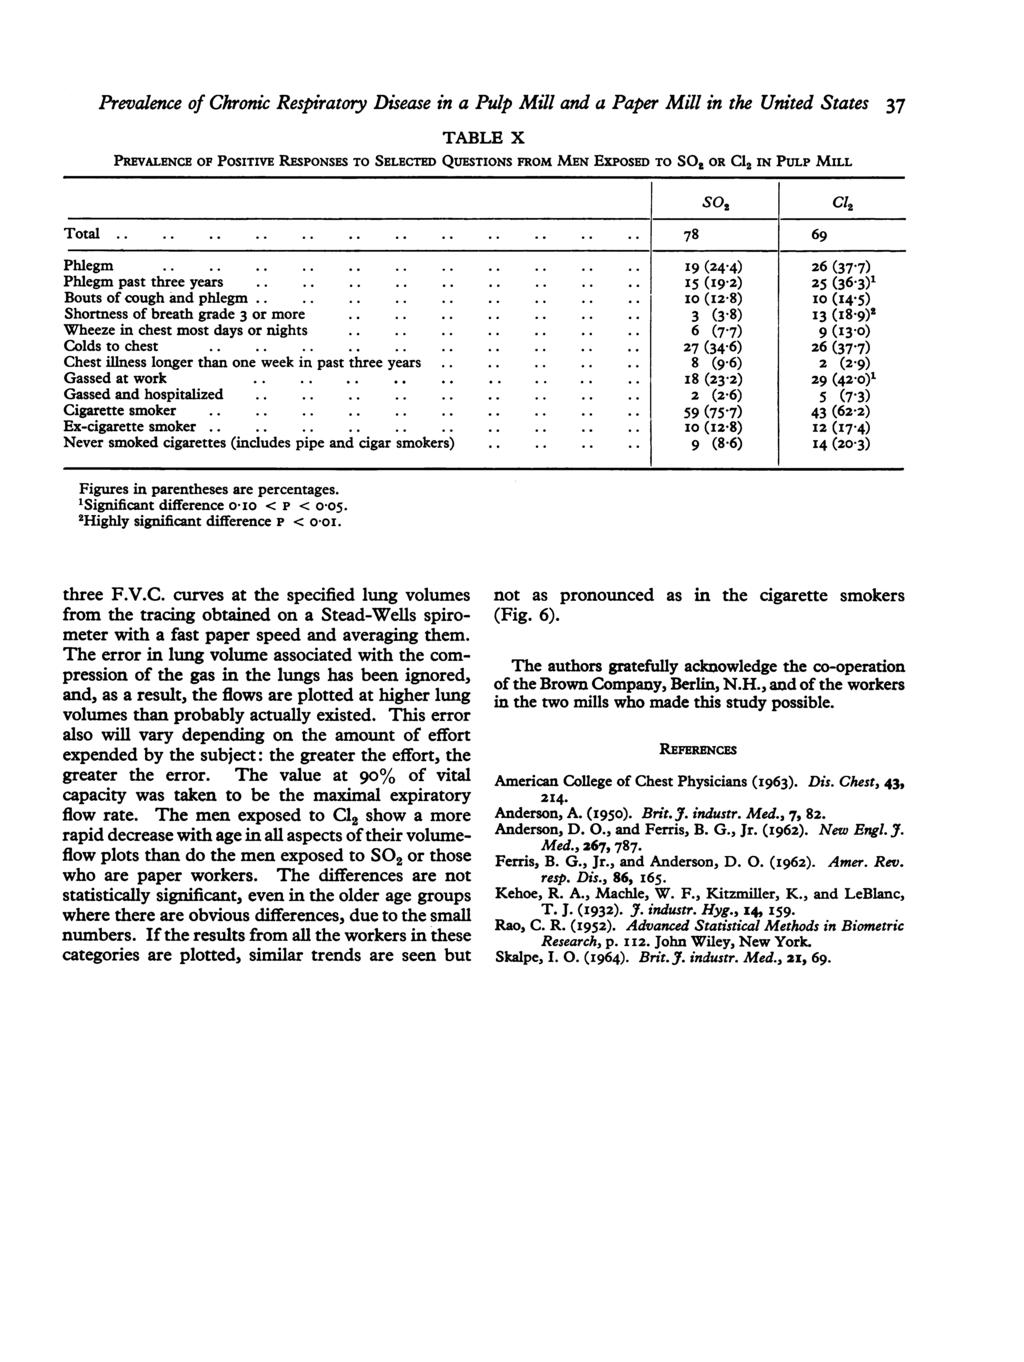 Prevalence of Chronic Respiratory Disease in a Pulp Mill and a Paper Mill in the United States 37 TABLE X PREVALENCE OF POSITIVE RESPONSES TO SELECTED QUESTIONS FROM MEN EXPOSED TO SO,, OR C12 IN